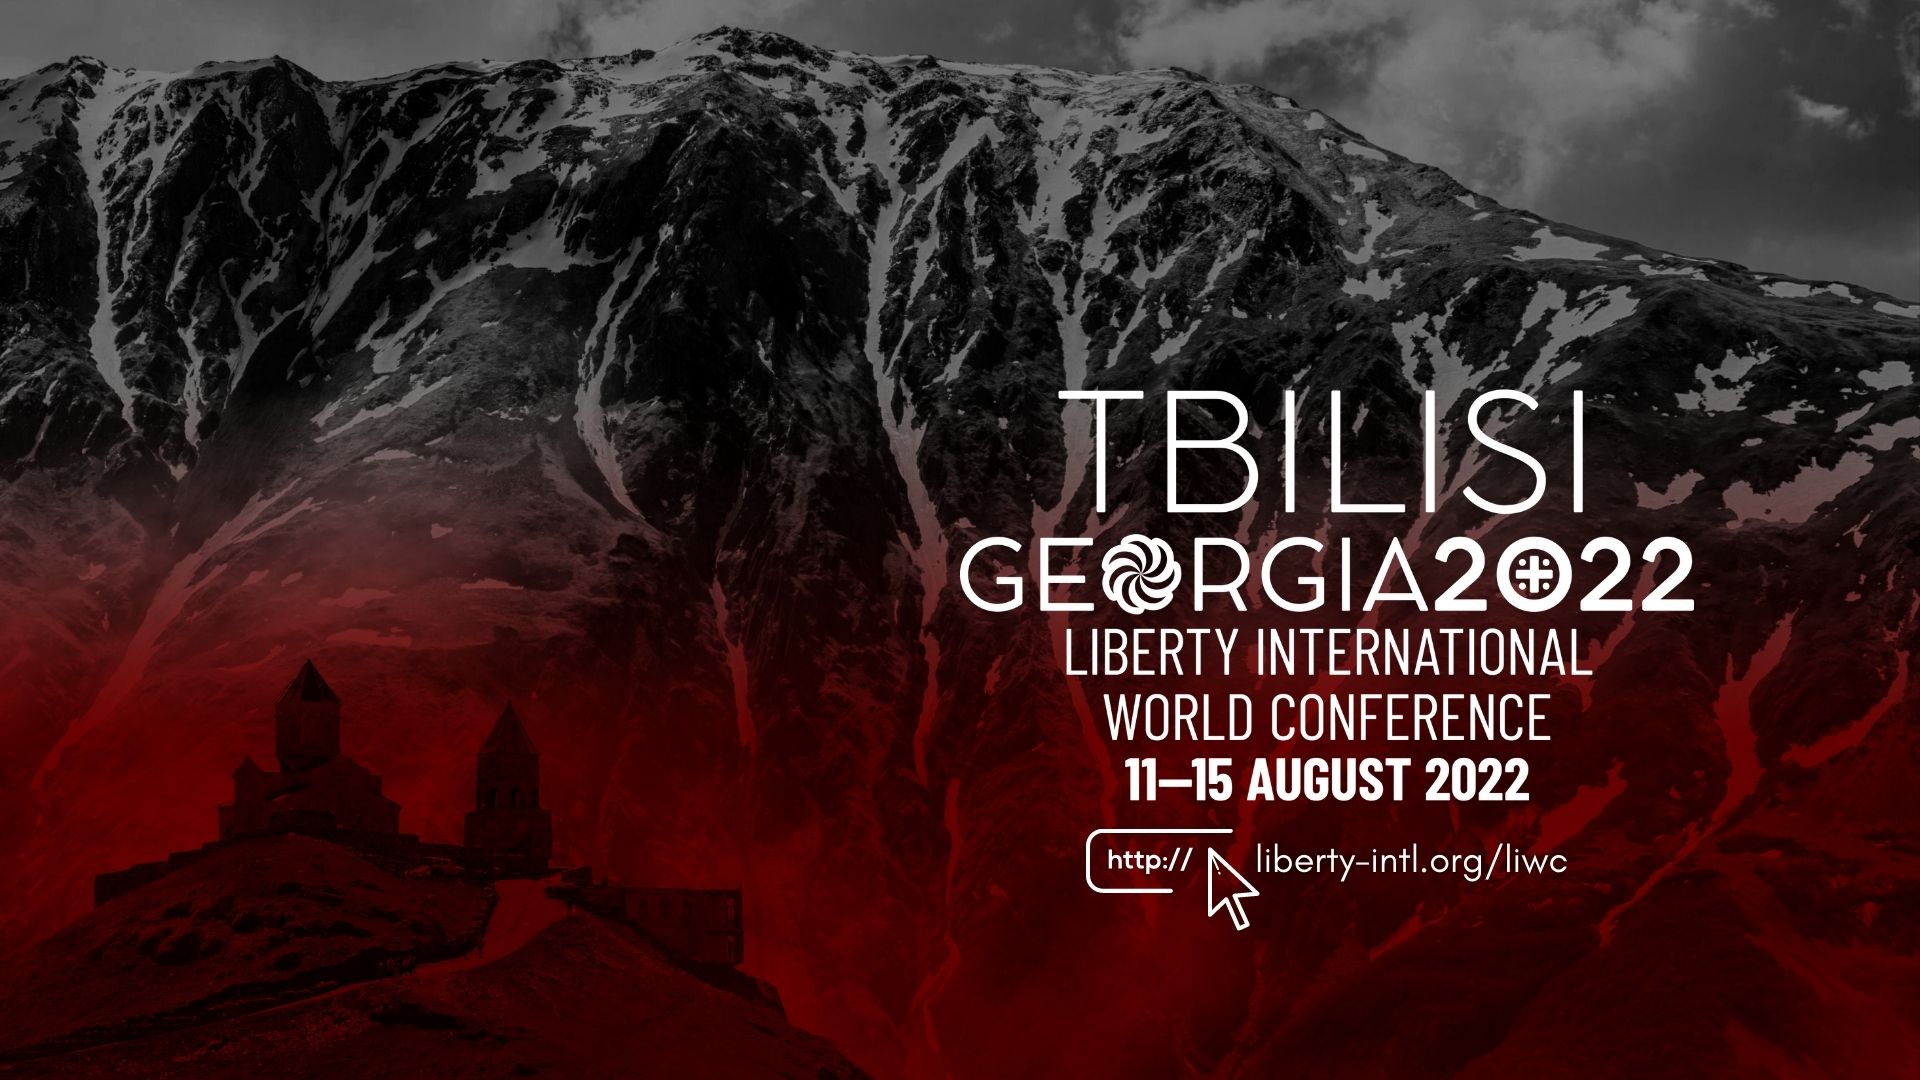 The full Liberty International World Conference Tbilisi 2022 agenda is available!